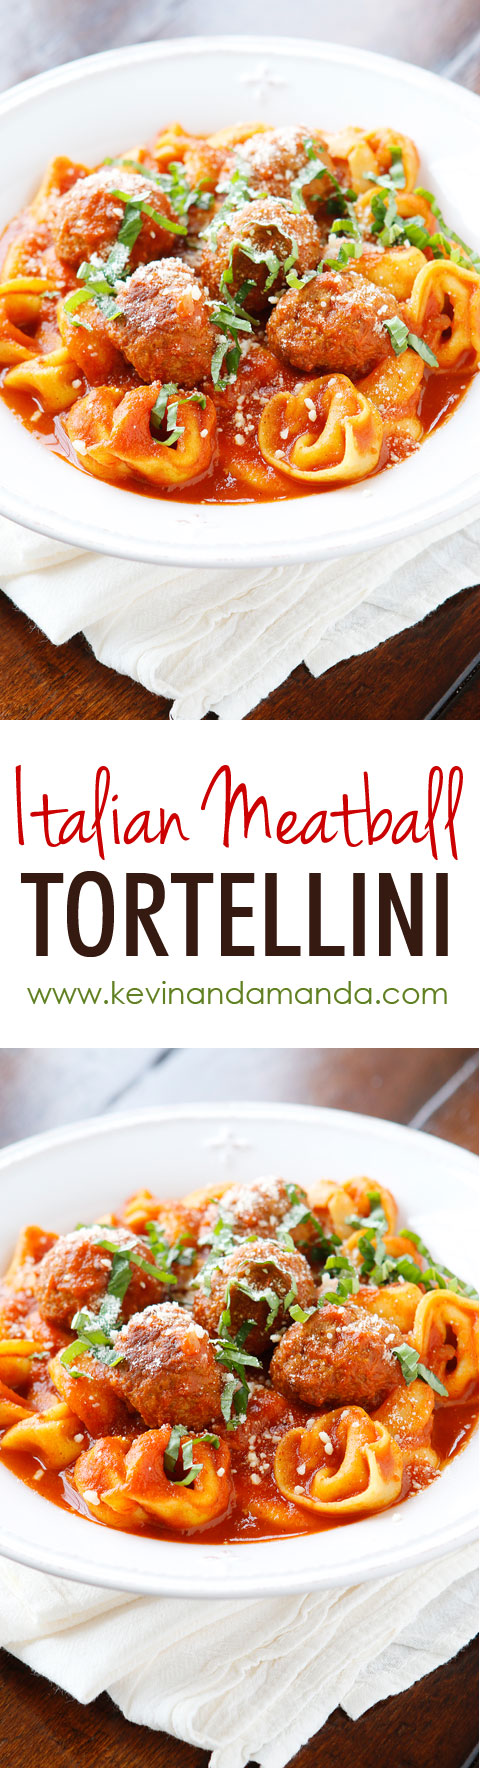 Italian Meatball Tortellini. I keep the ingredients for this on hand at ALL times. This is seriously the best 4-ingredient, quick and easy, family-friendly meal when you need something everyone will eat and FAST! 